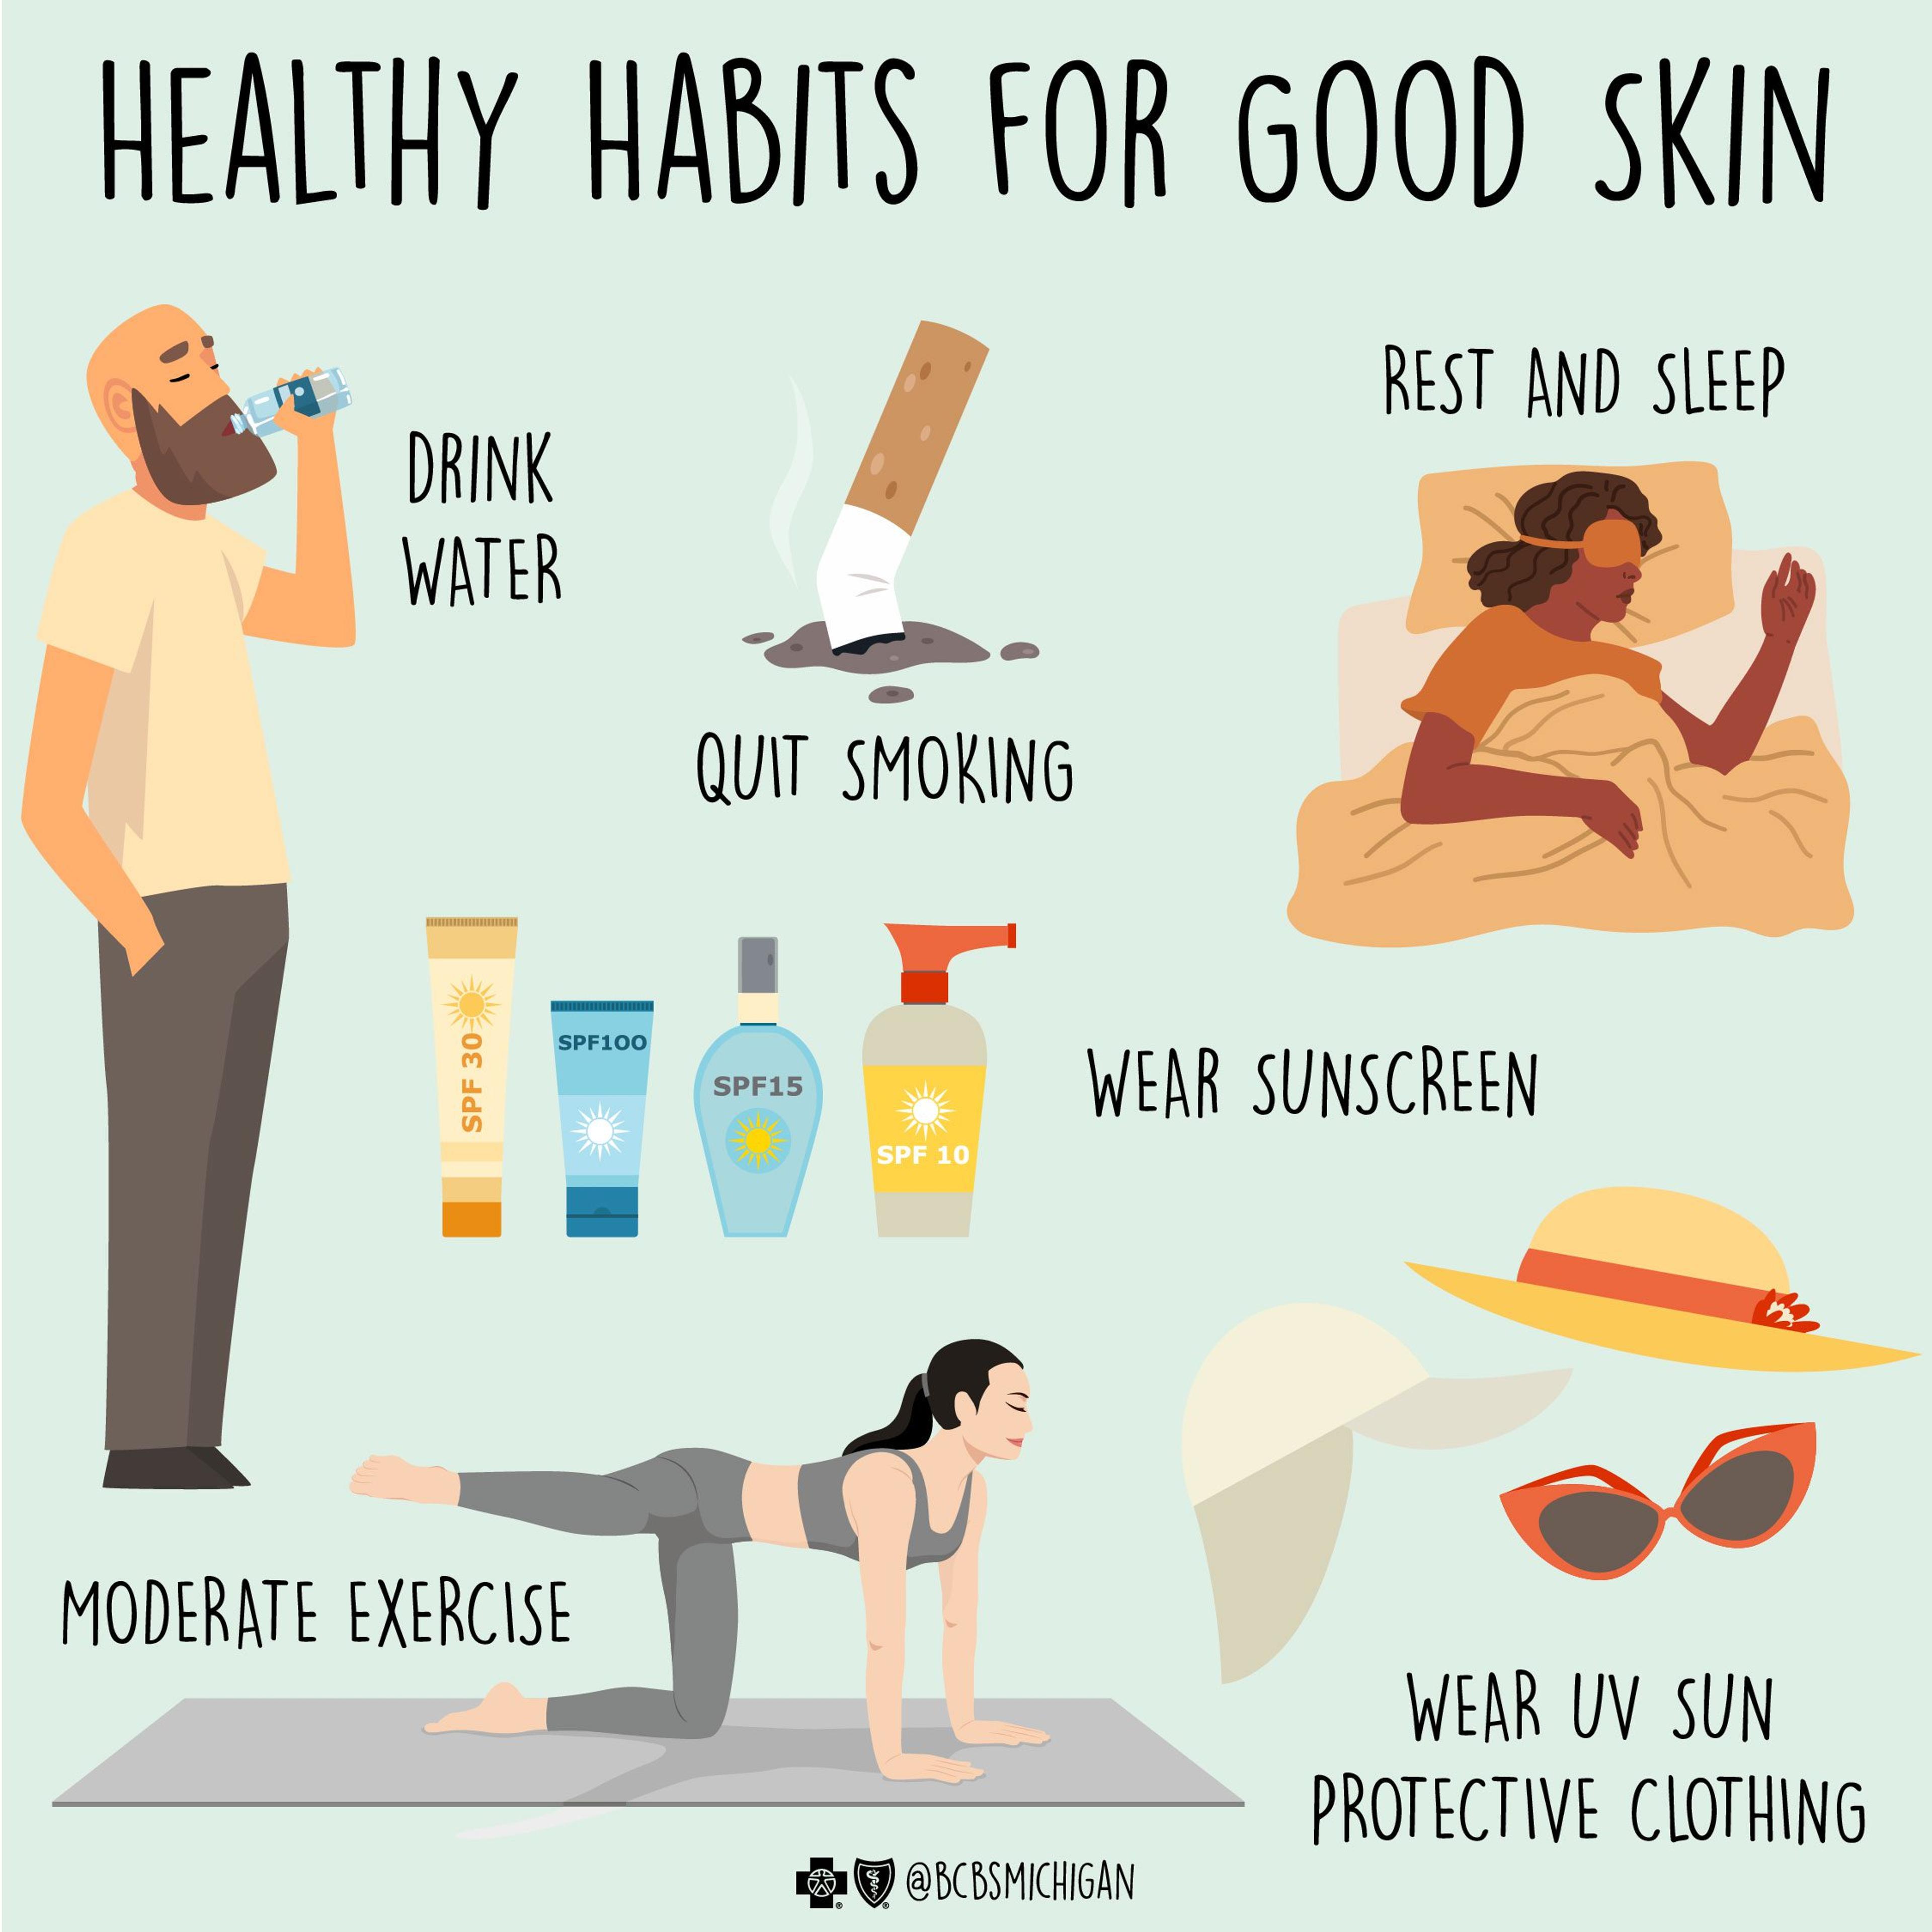 Healthy Habits for Good Skin